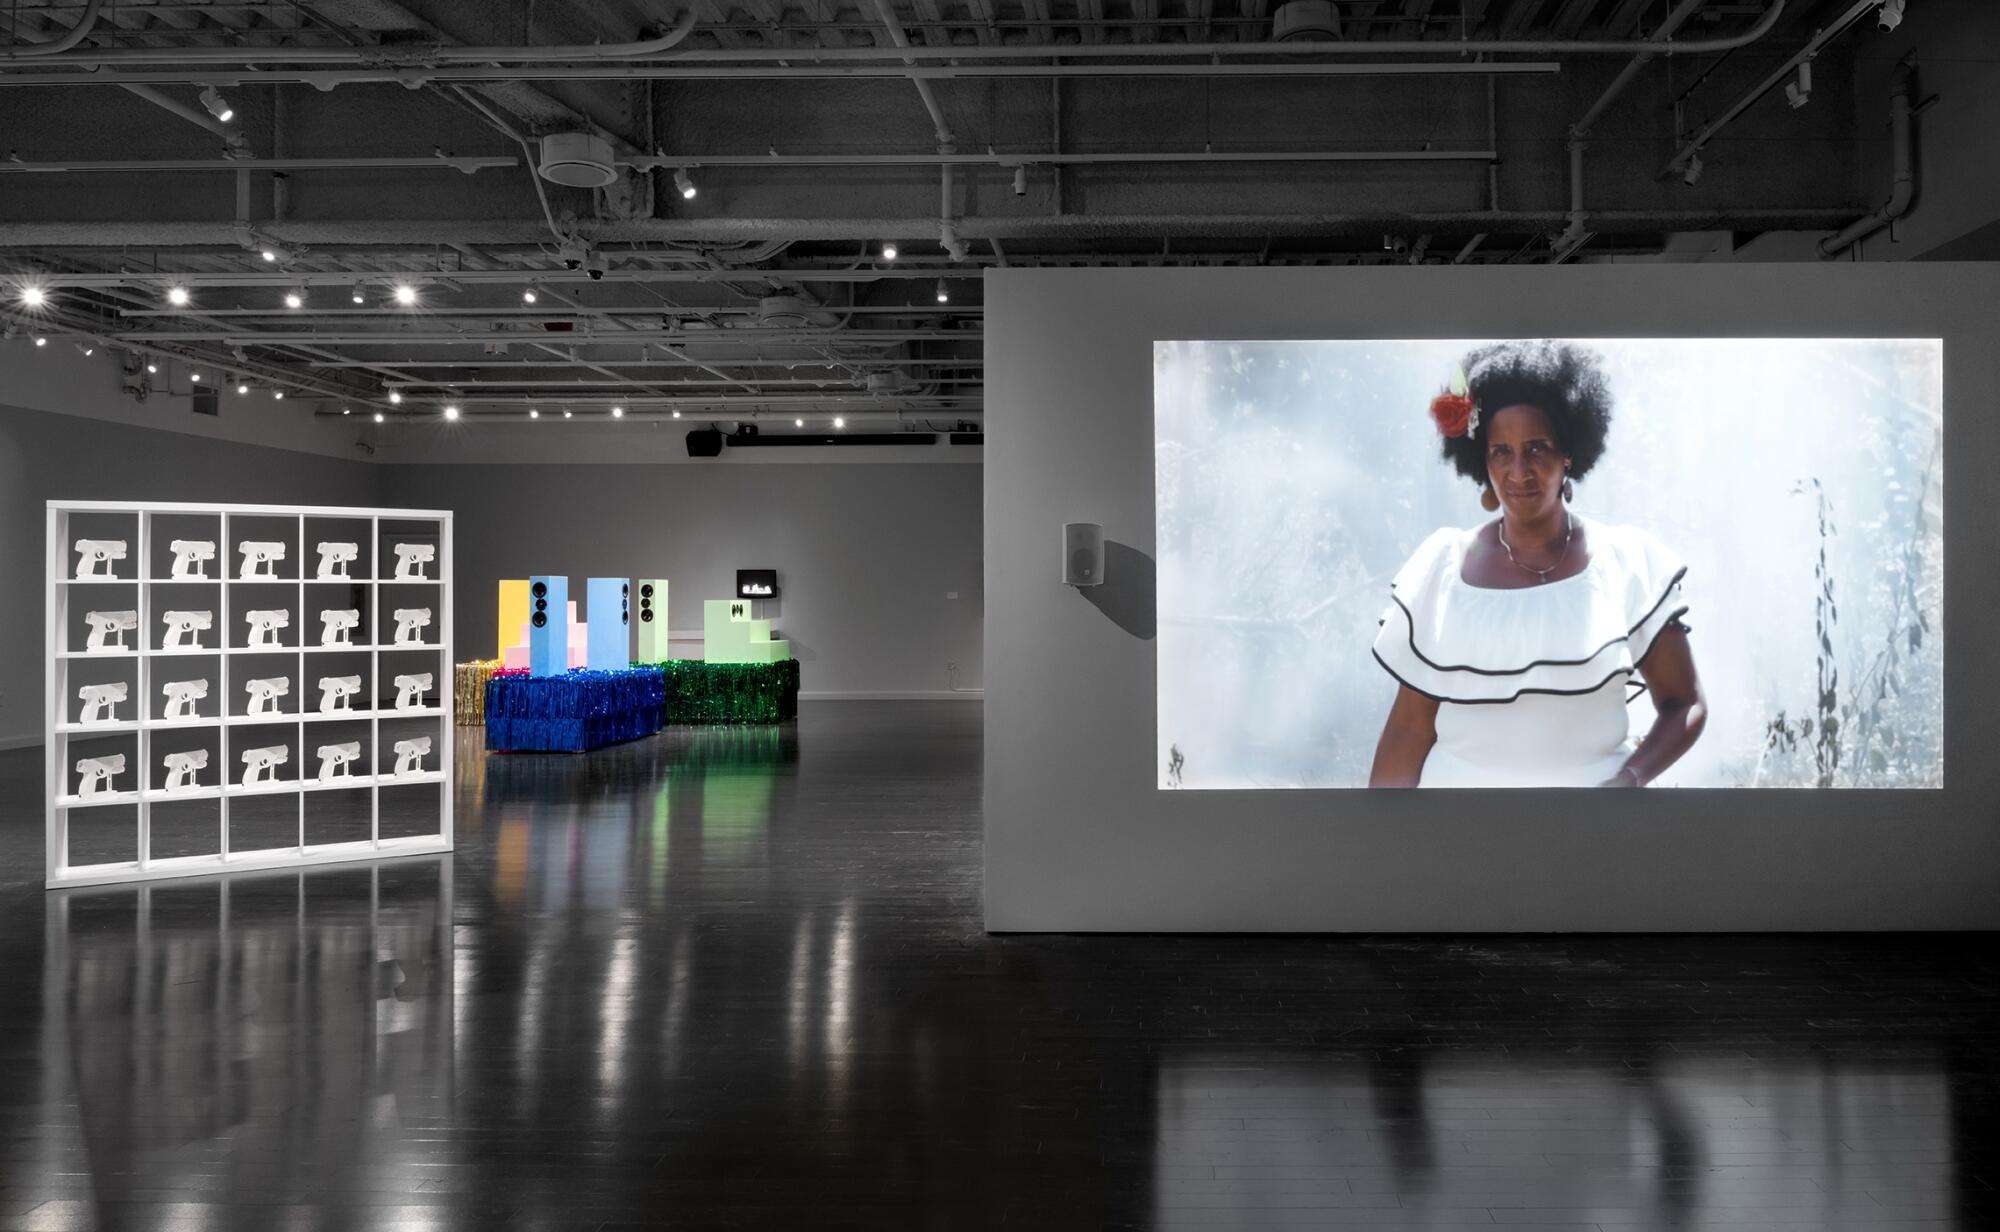 An art gallery contains two sculptural installations — one all in white, one in color — as well as a video projection